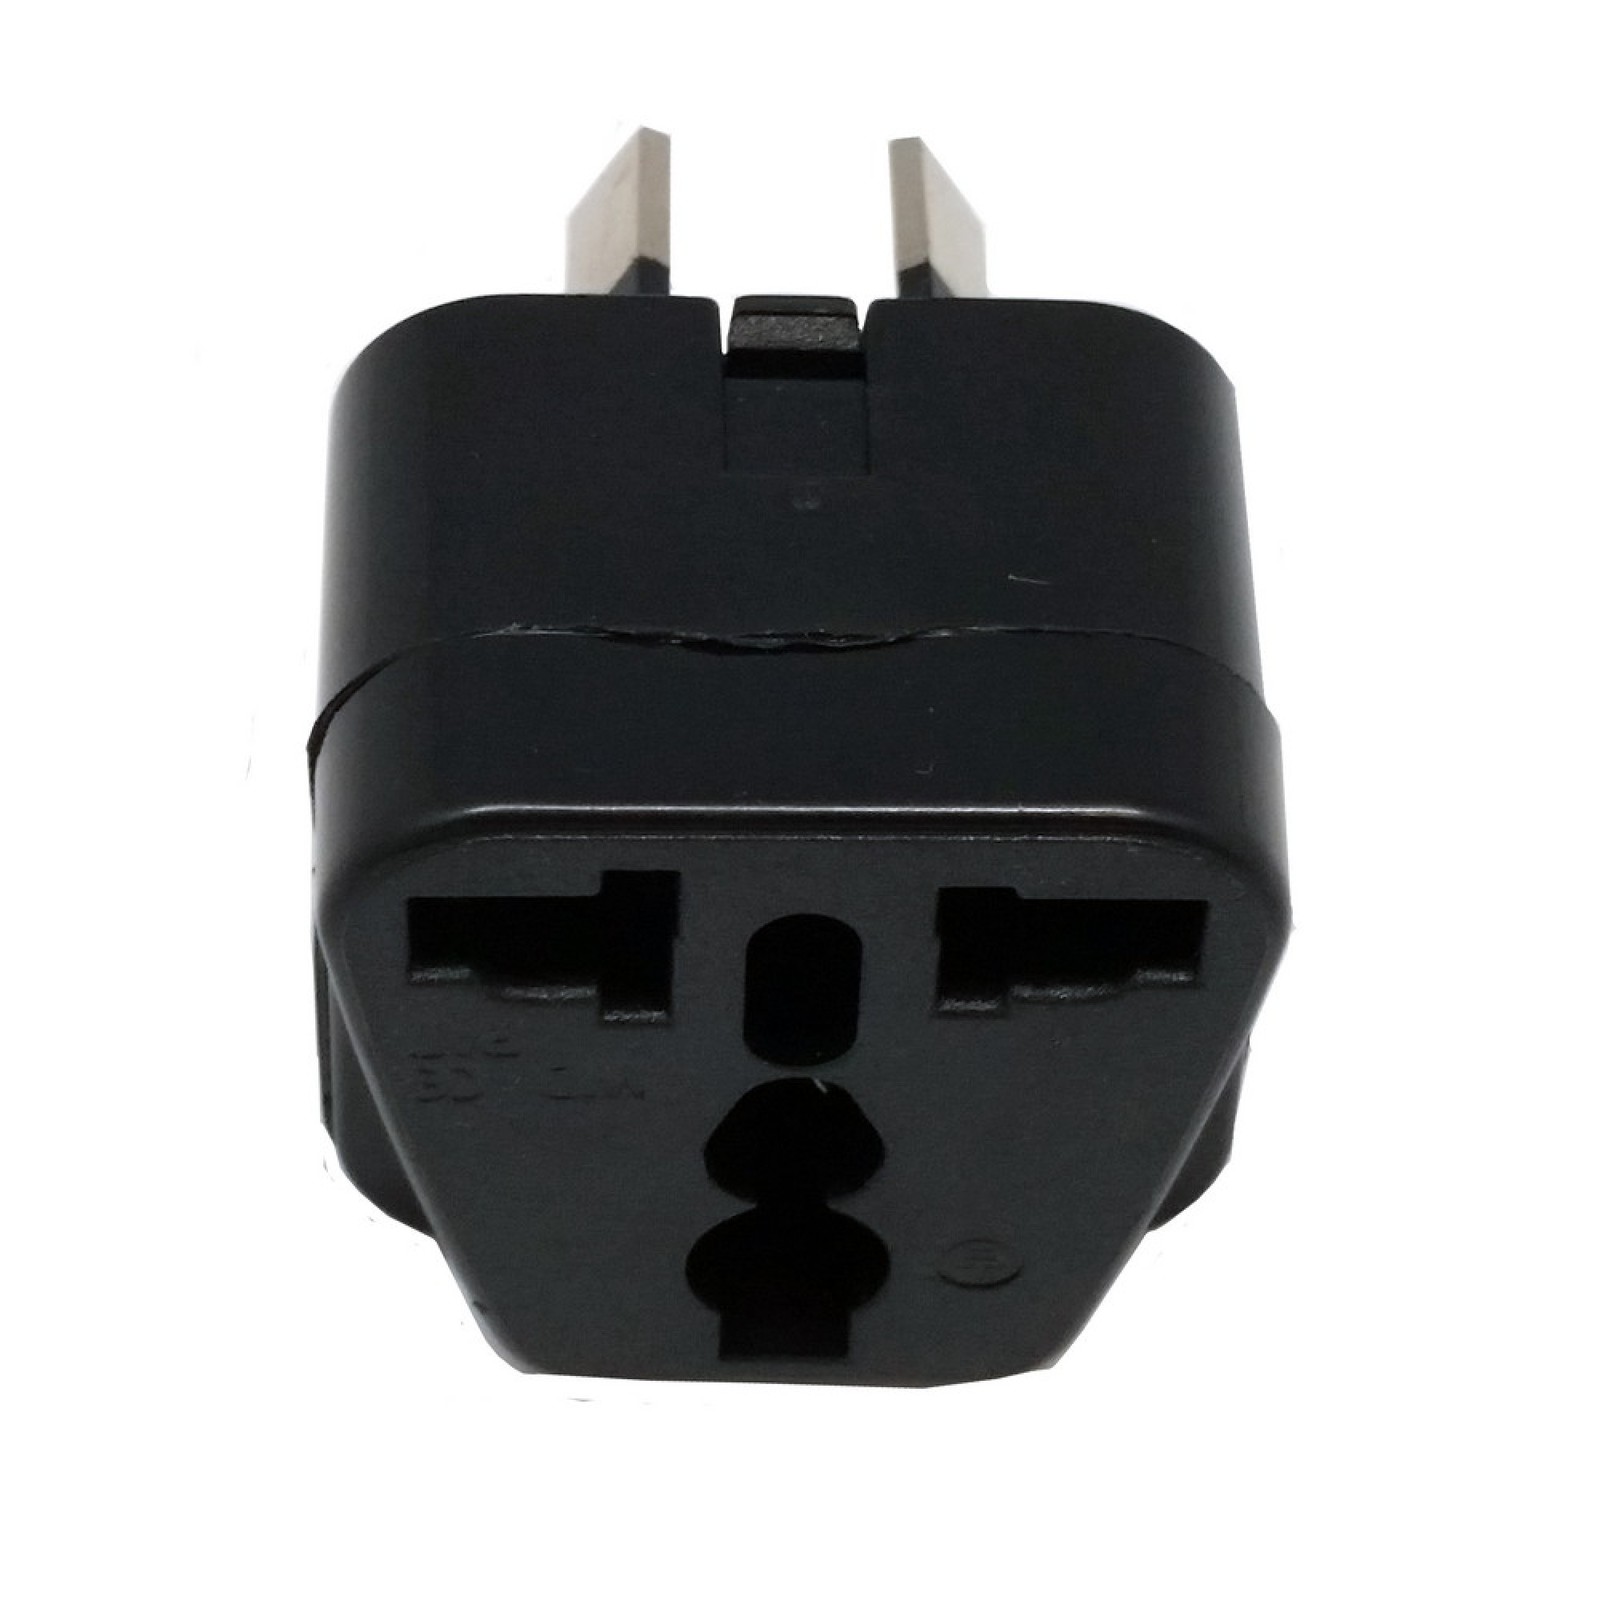 Flat pin Adaptor - travel Adapter to change a round earth pin plug to flat earth pin used for Fluro CFL lamps - lighting reflector adaptor 